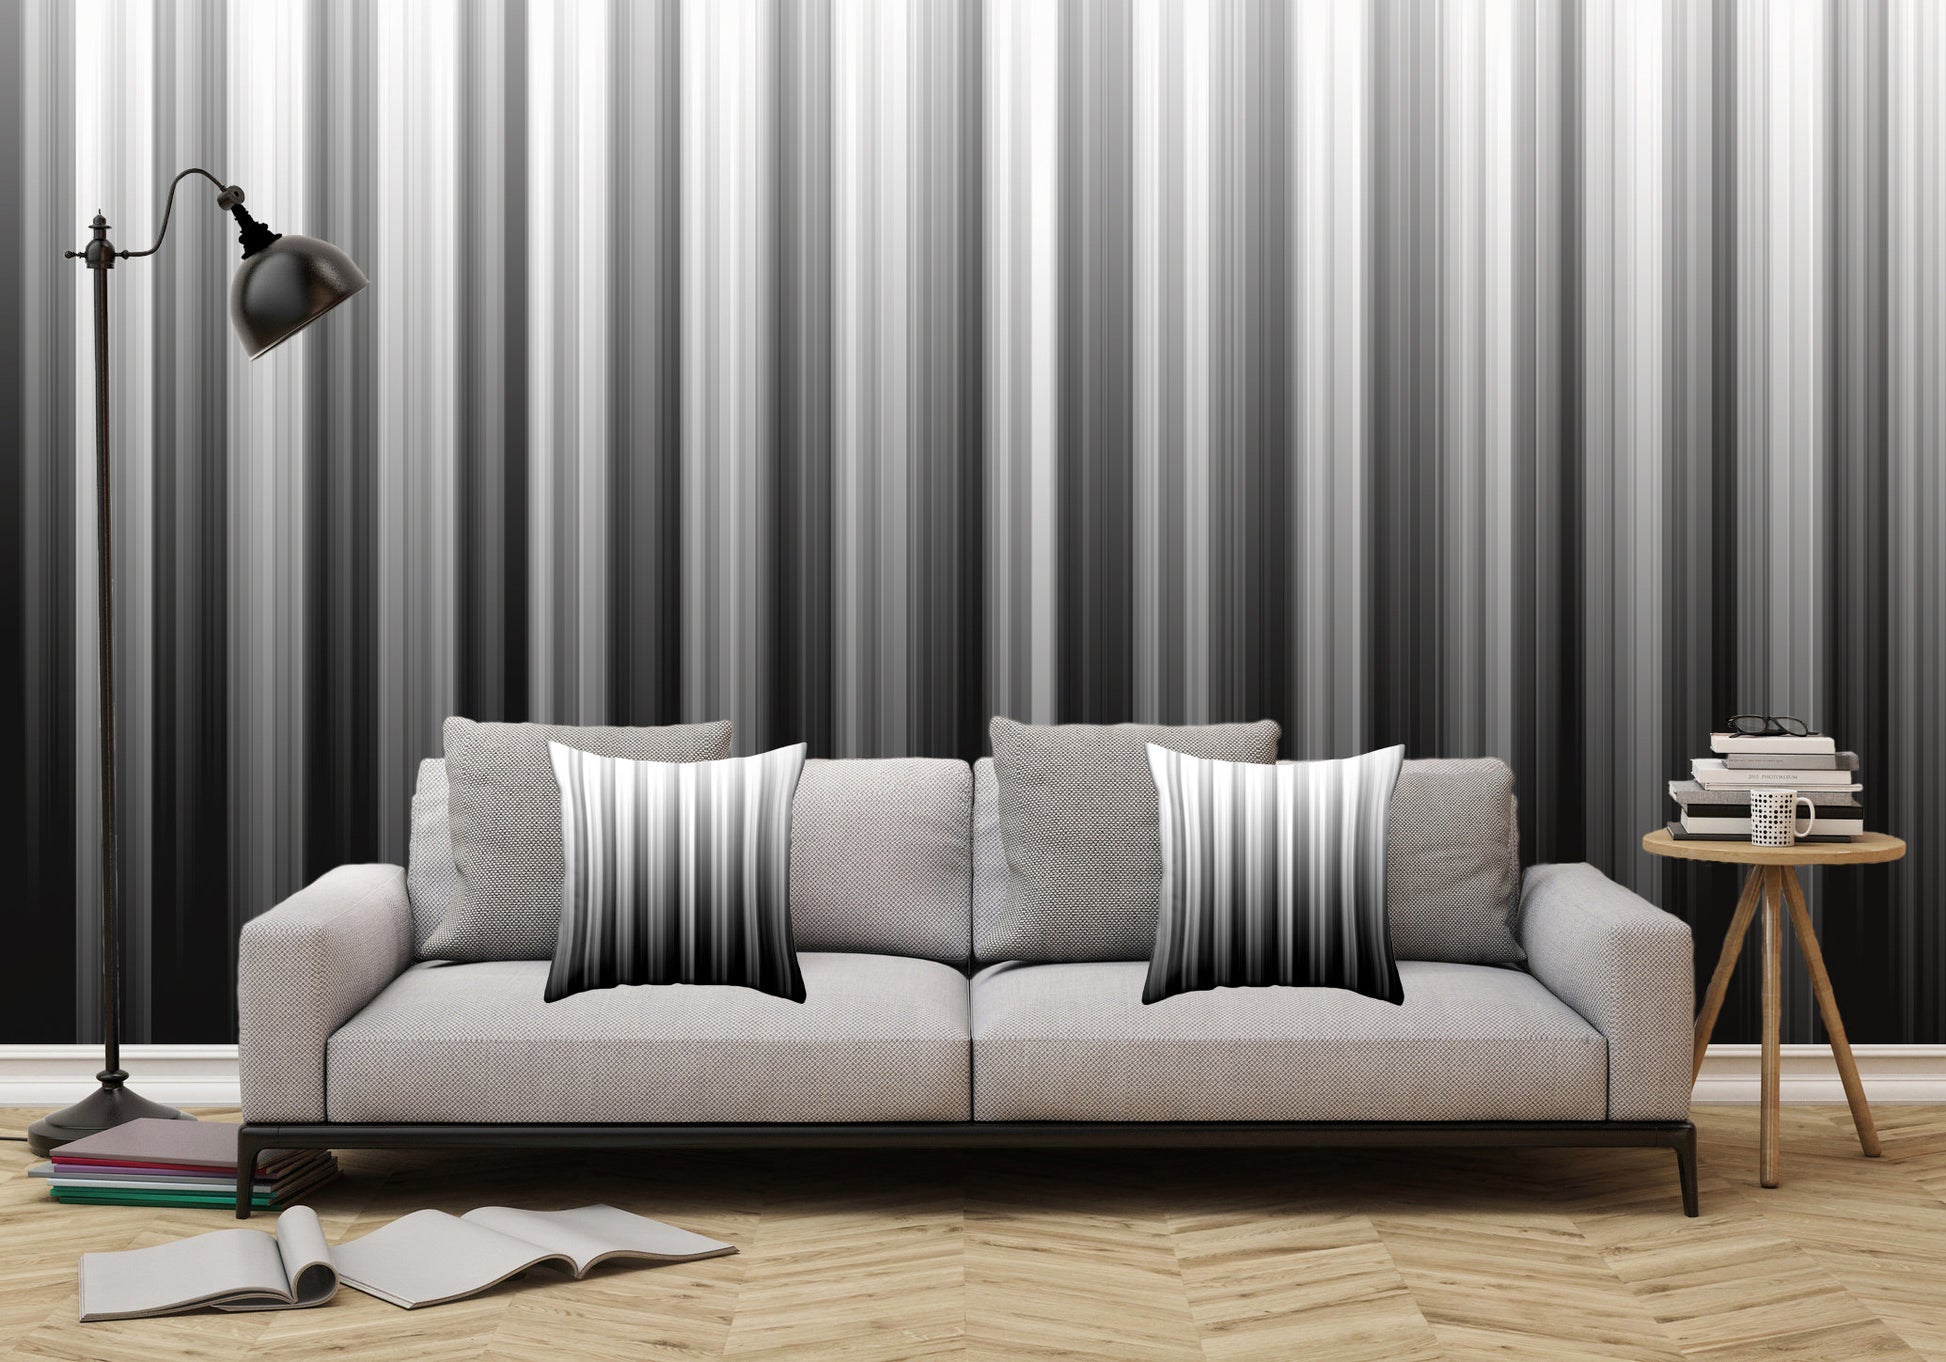 Black And White Soft Lines - Adhesive Wallpaper - Removable Wallpaper - Wall Sticker - Full Size Wall Mural  - PIPAFINEART